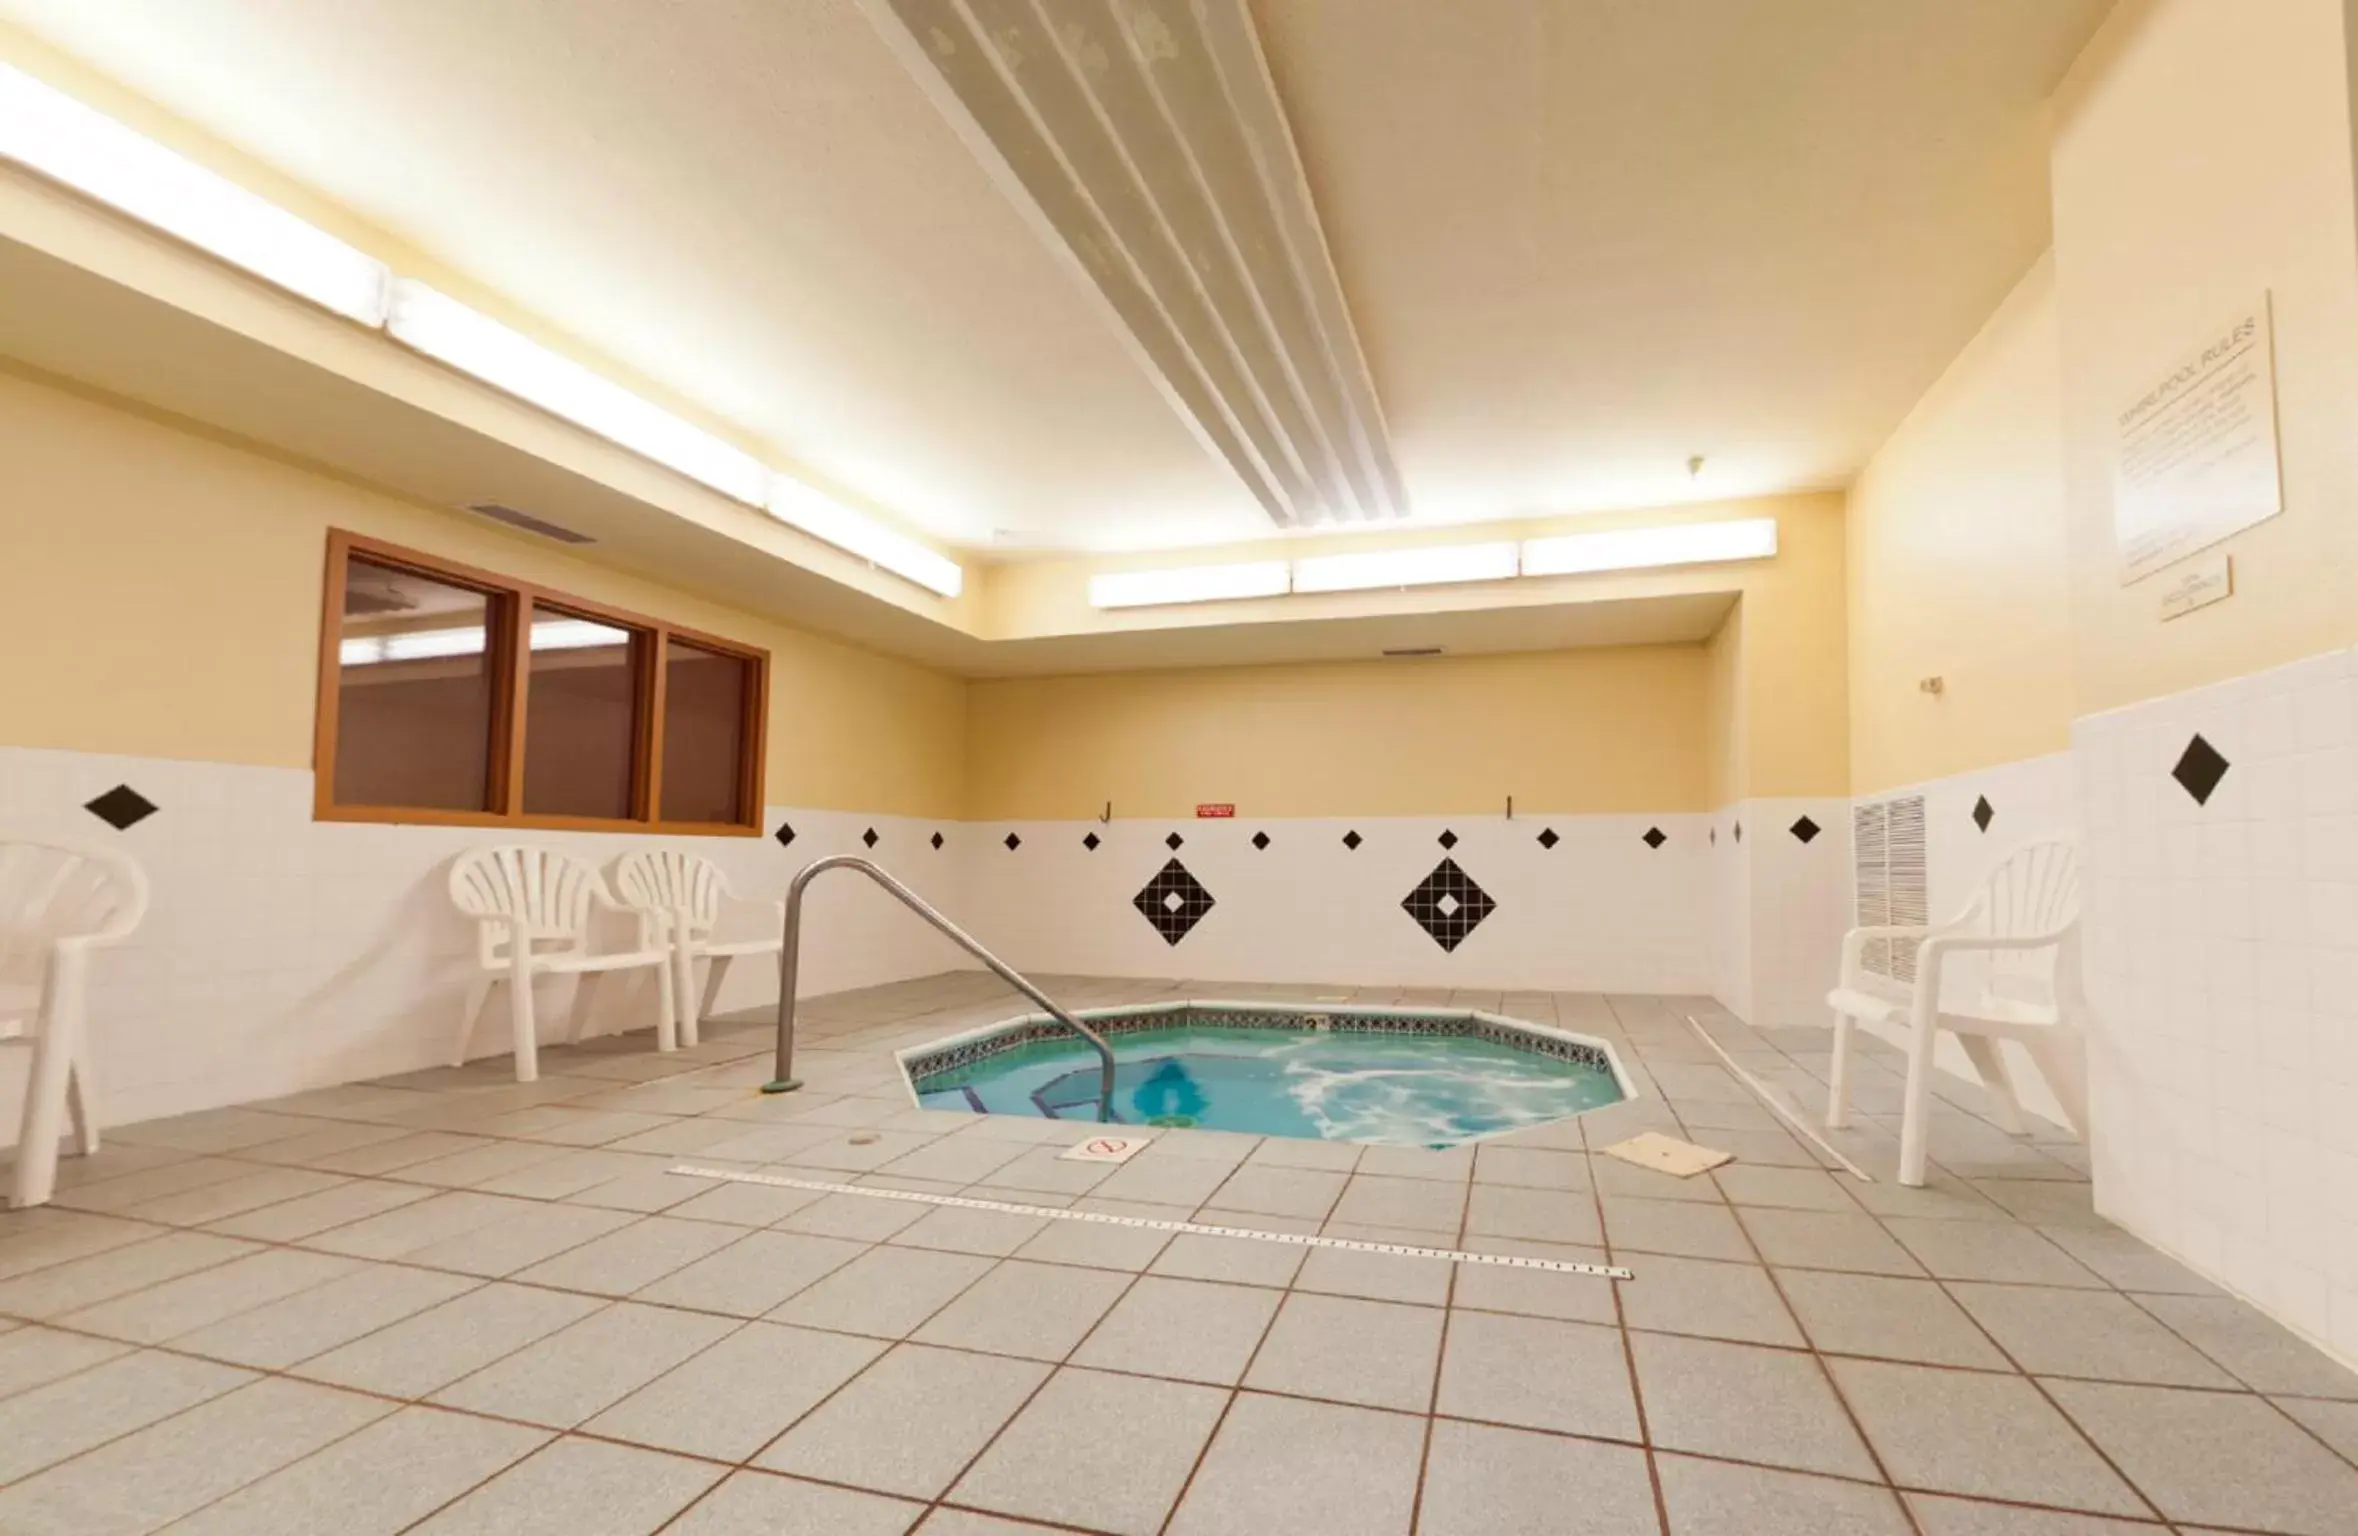 Area and facilities, Swimming Pool in AmericInn by Wyndham, Galesburg, IL